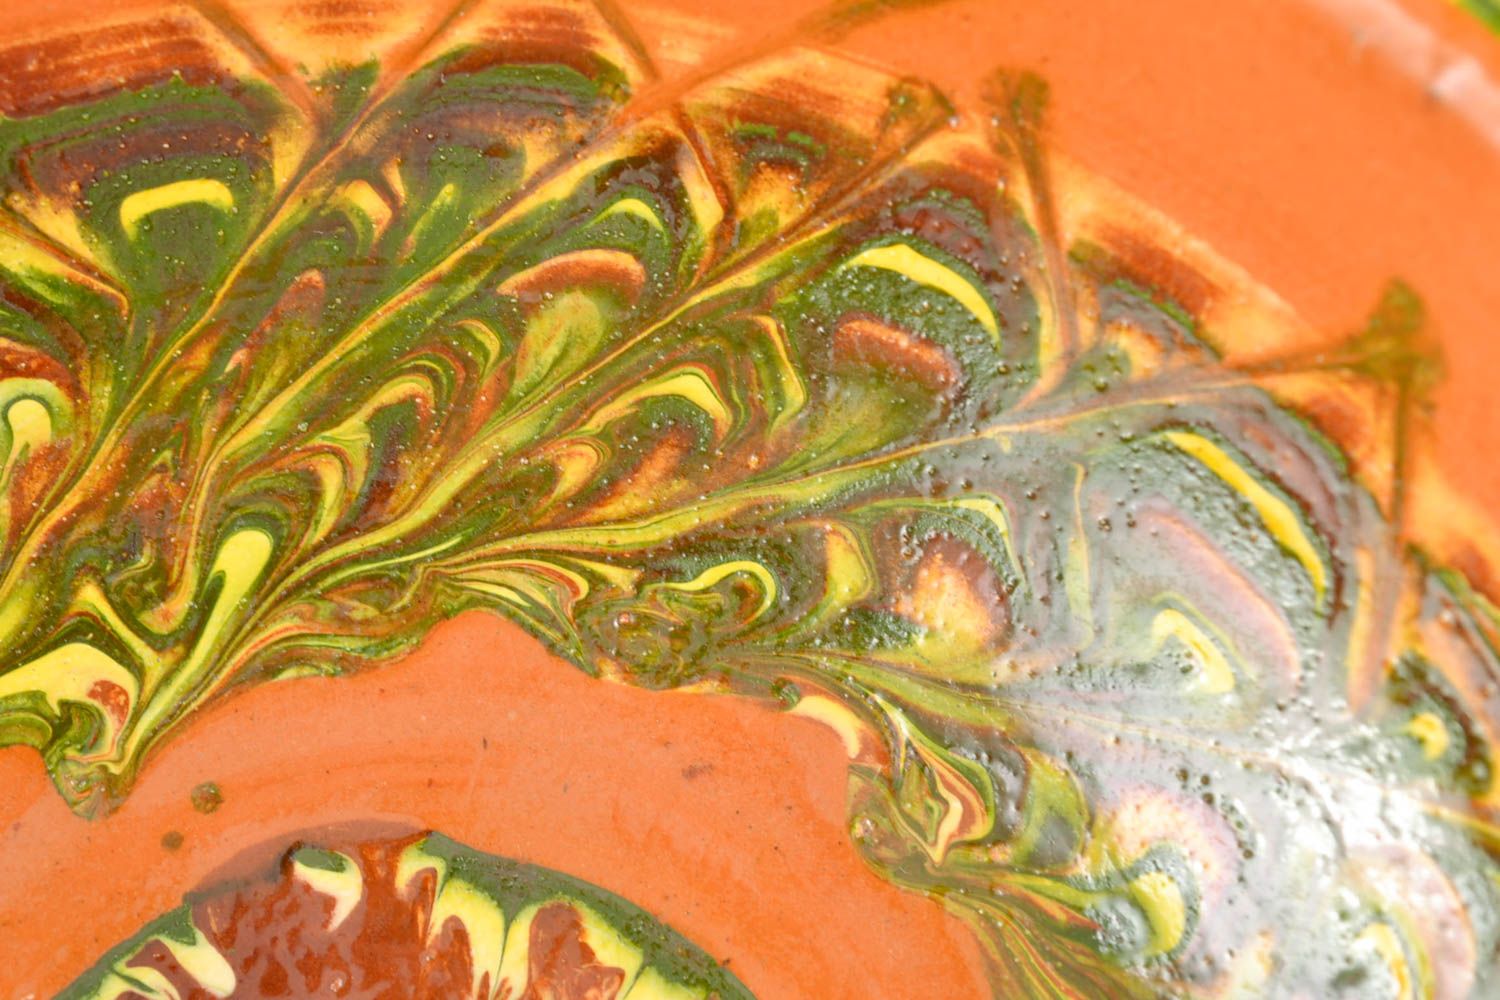 Ceramic bowl with painting photo 2